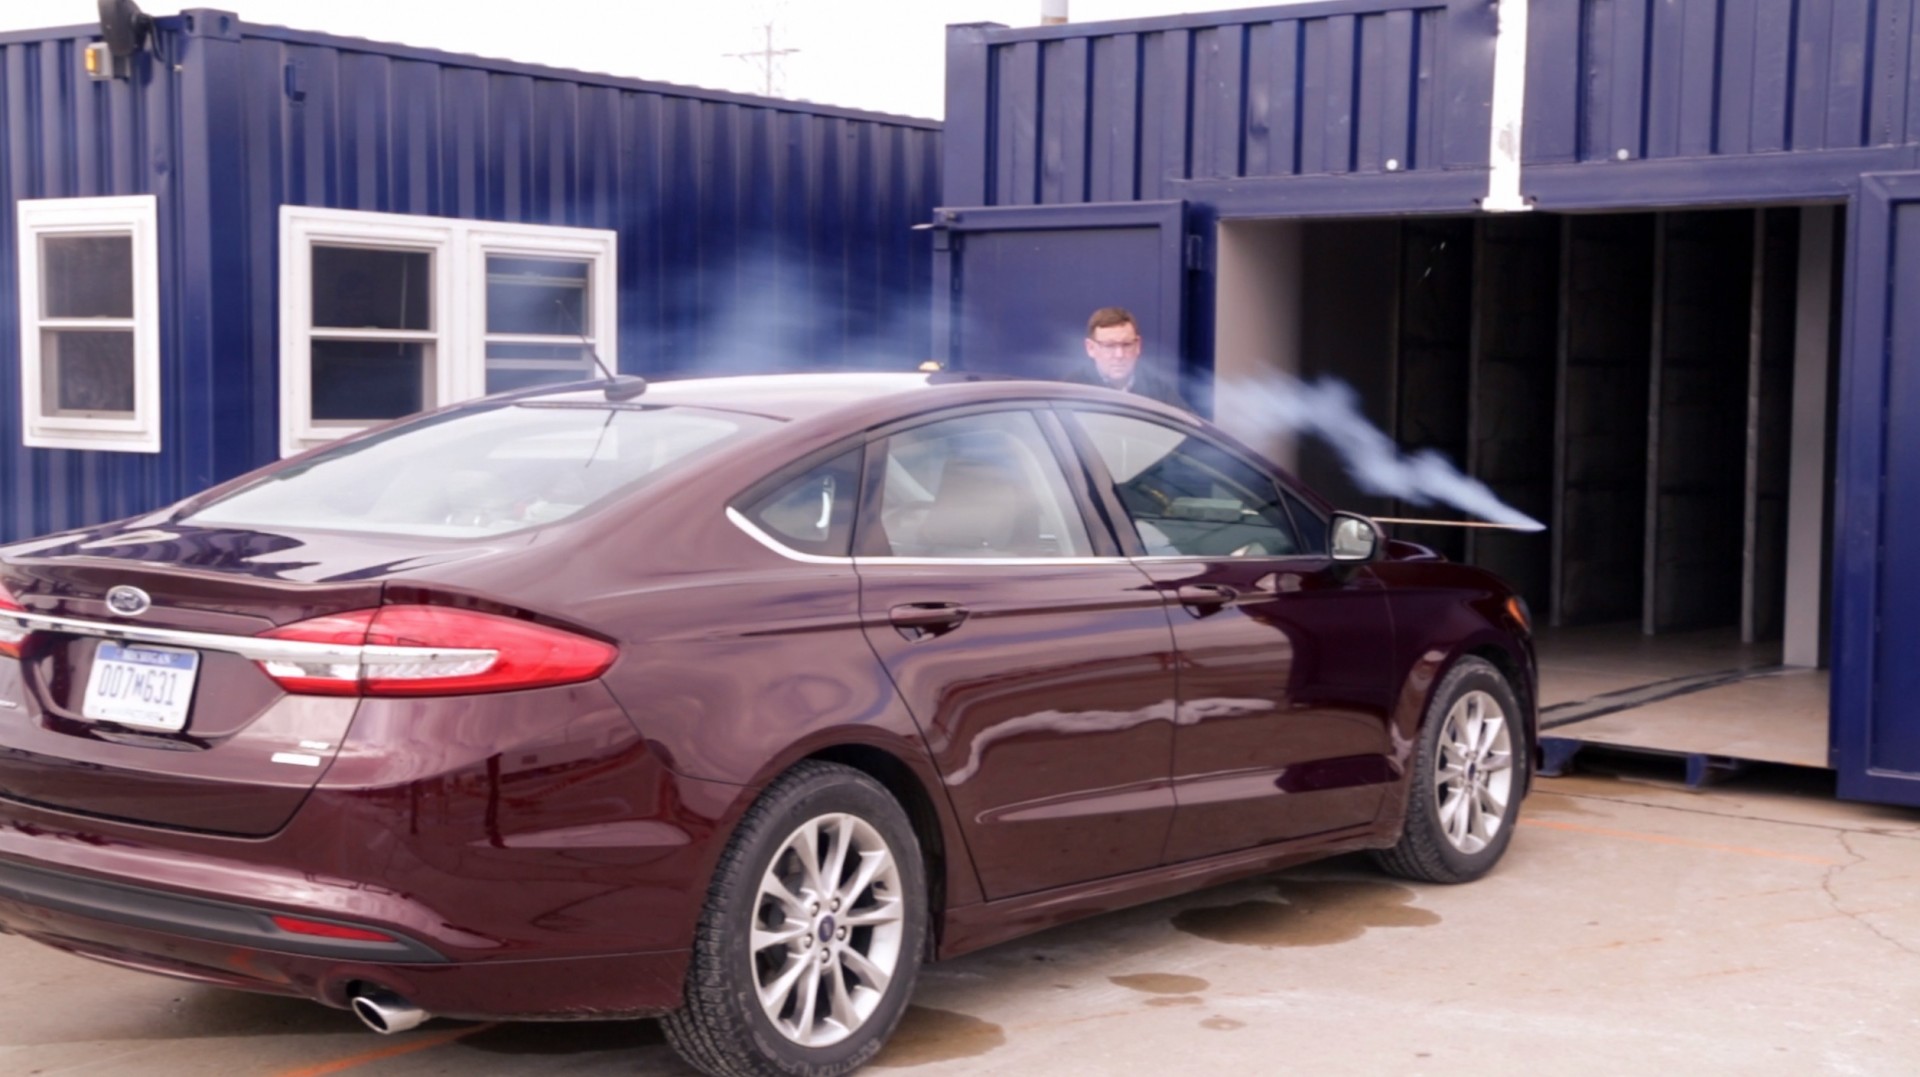 Ford engineers testing wind noise at its portable aeroacostic wind tunnel facility